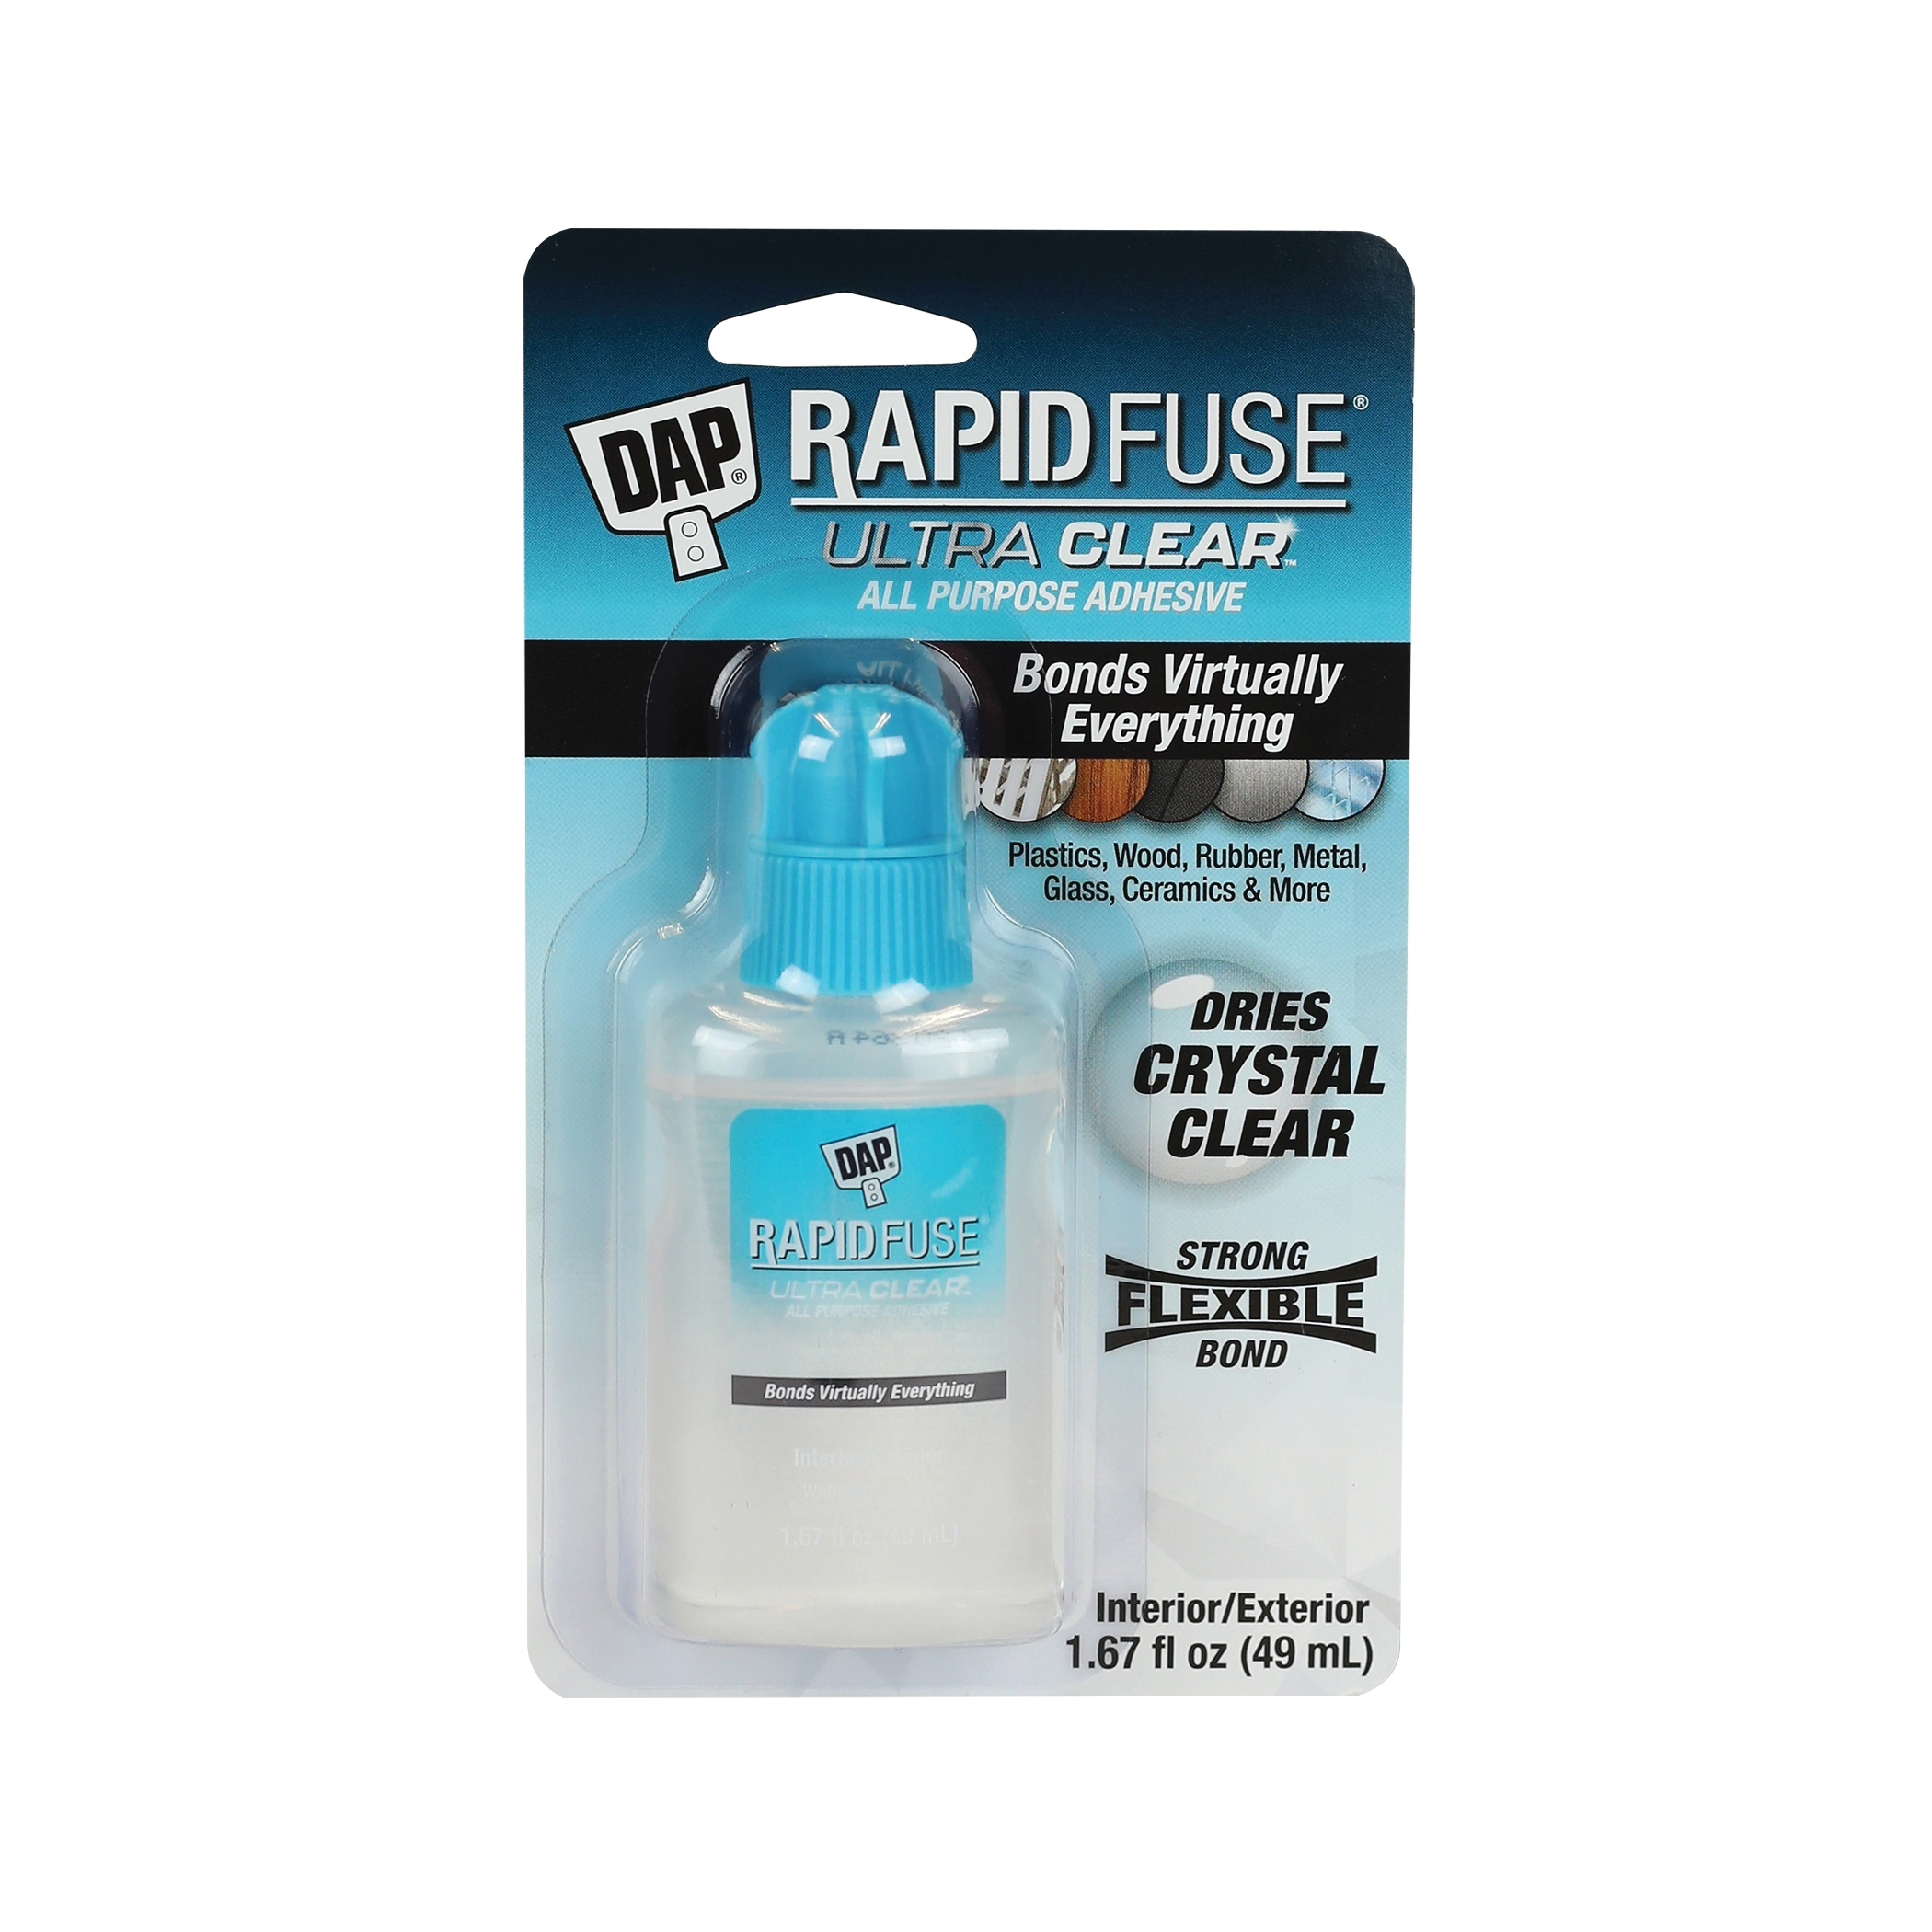 RapidFuse 7079800180 All-Purpose Adhesive, Clear, 1.67 fl-oz Bottle